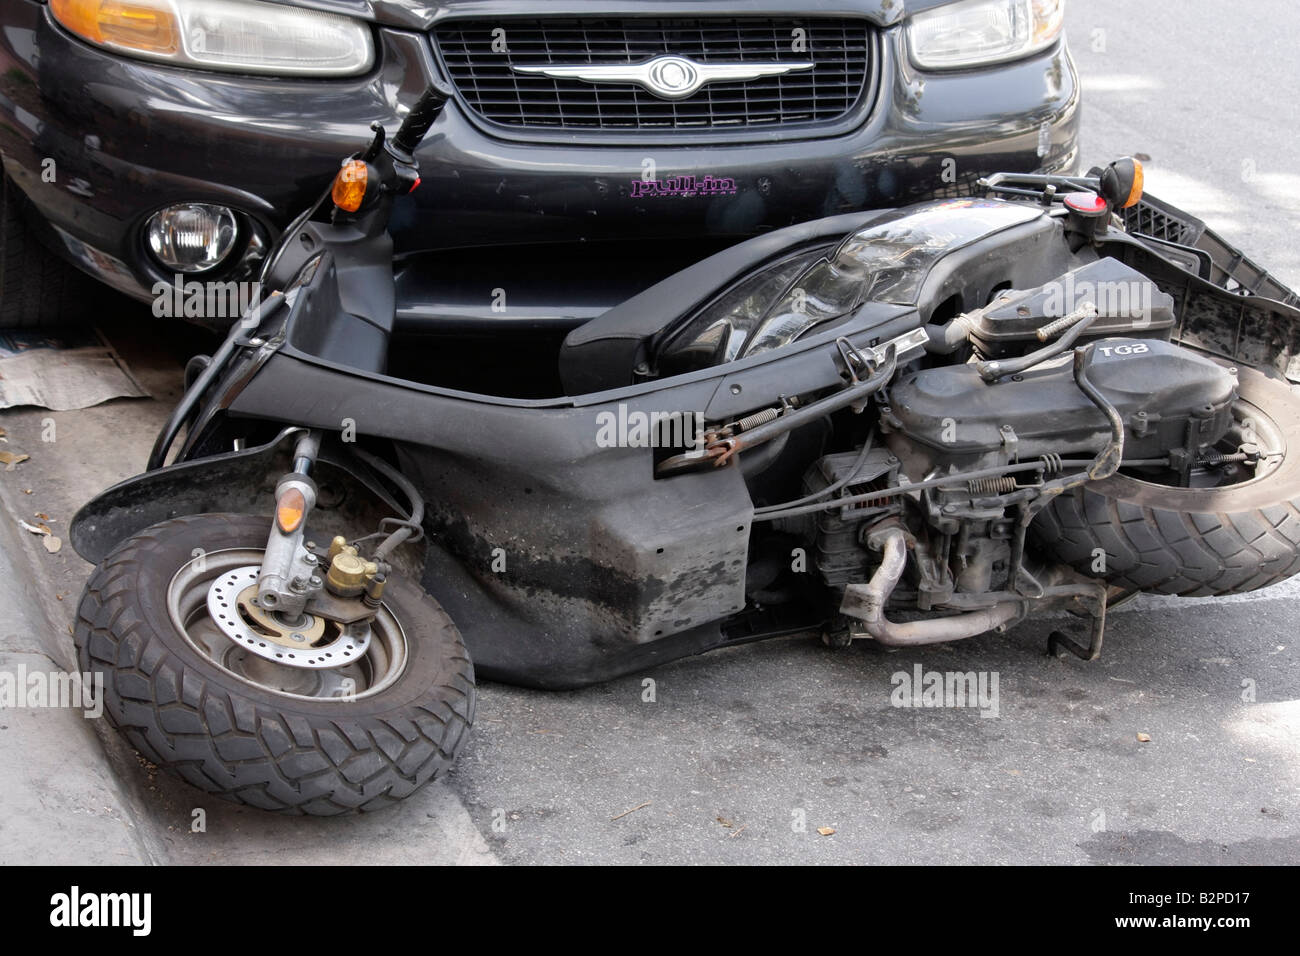 Miami Beach Florida,Washington Avenue,scooter,motorcycle,tip over,fall on pavement,damage,parked,auto,car,accident,FL080513013 Stock Photo